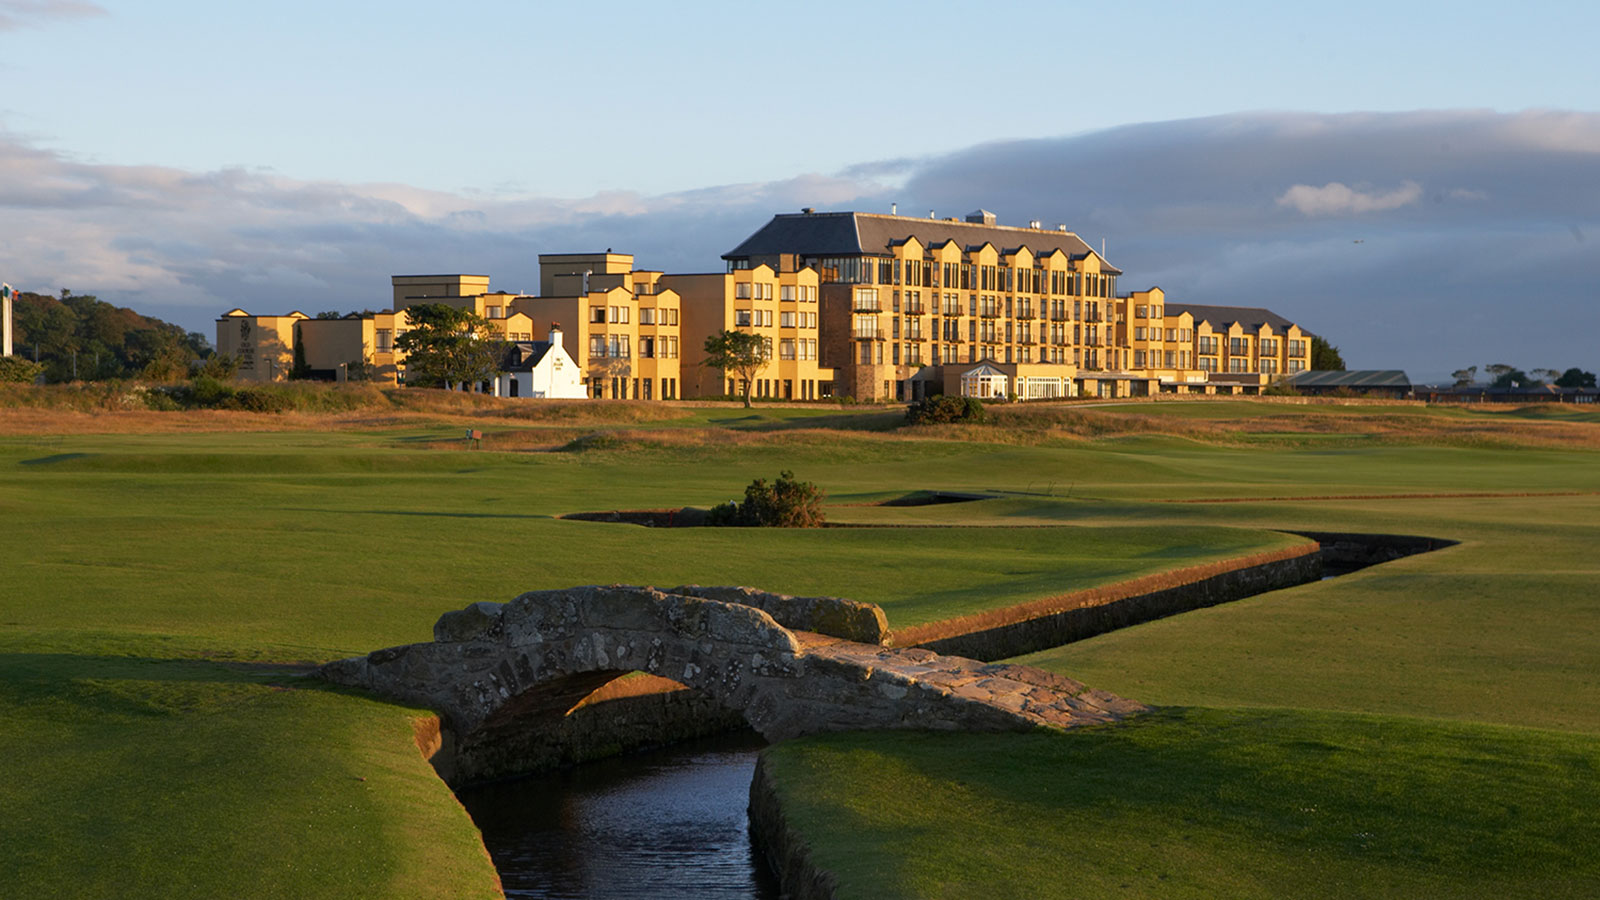 Discover the famed Old Course just steps away from this stunning historic hotel.